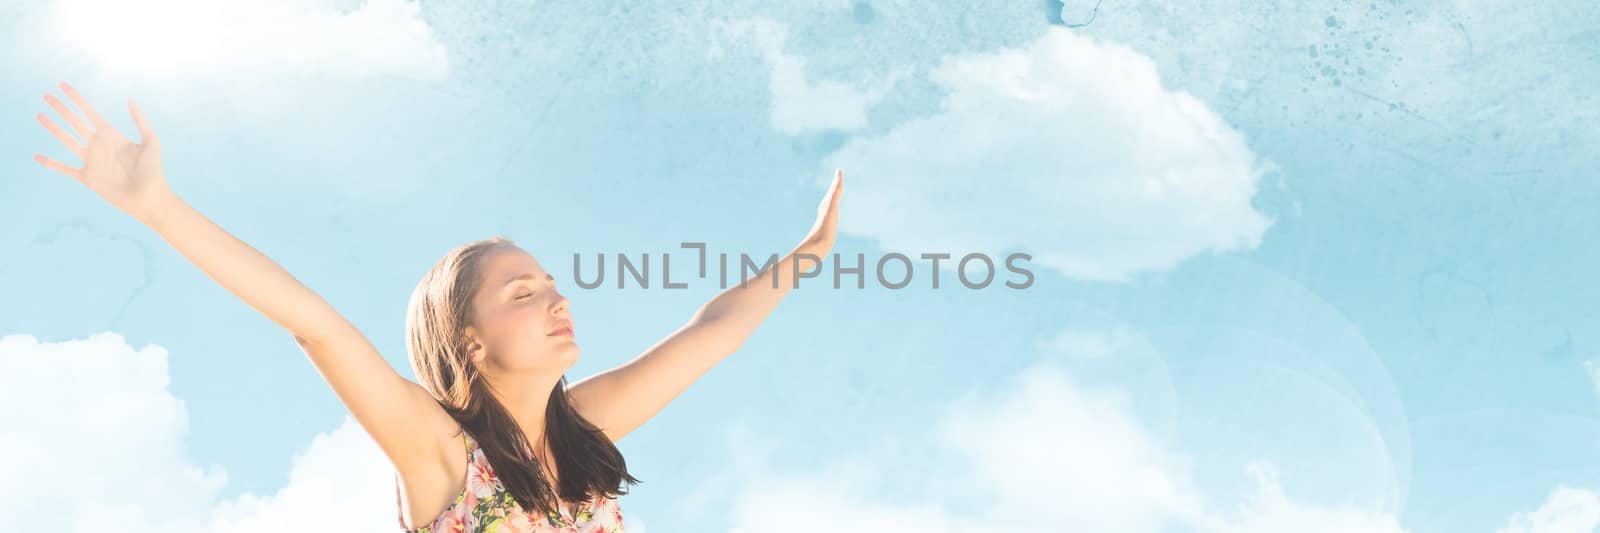 Millennial woman arms in air against Summer sky with flare by Wavebreakmedia